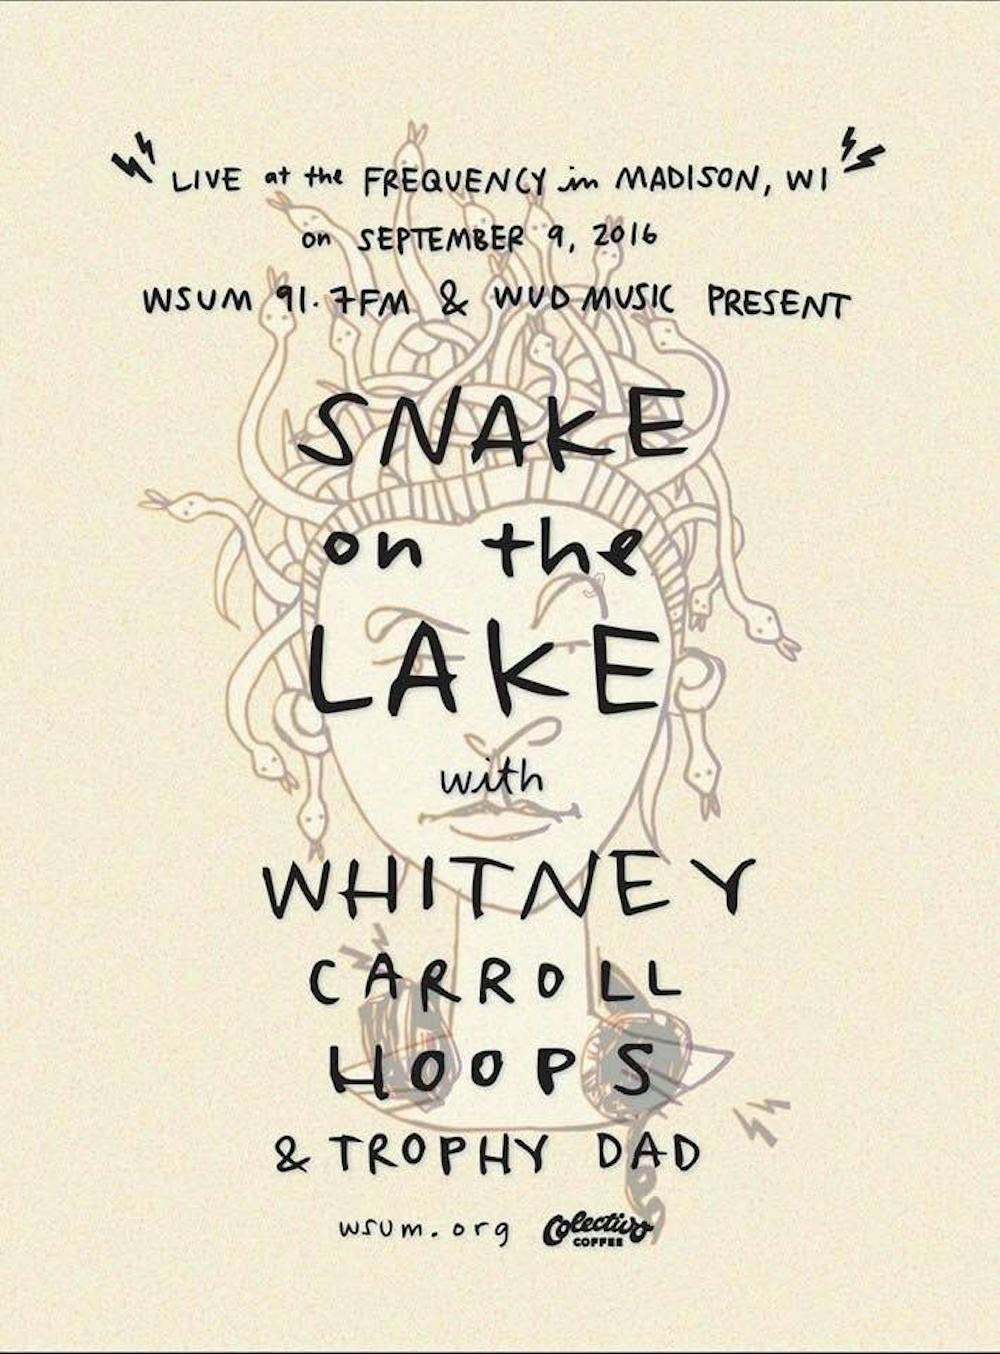 WSUM is readying to bring some exciting talent&nbsp;to&nbsp;Madison with&nbsp;Snake on the Lake.